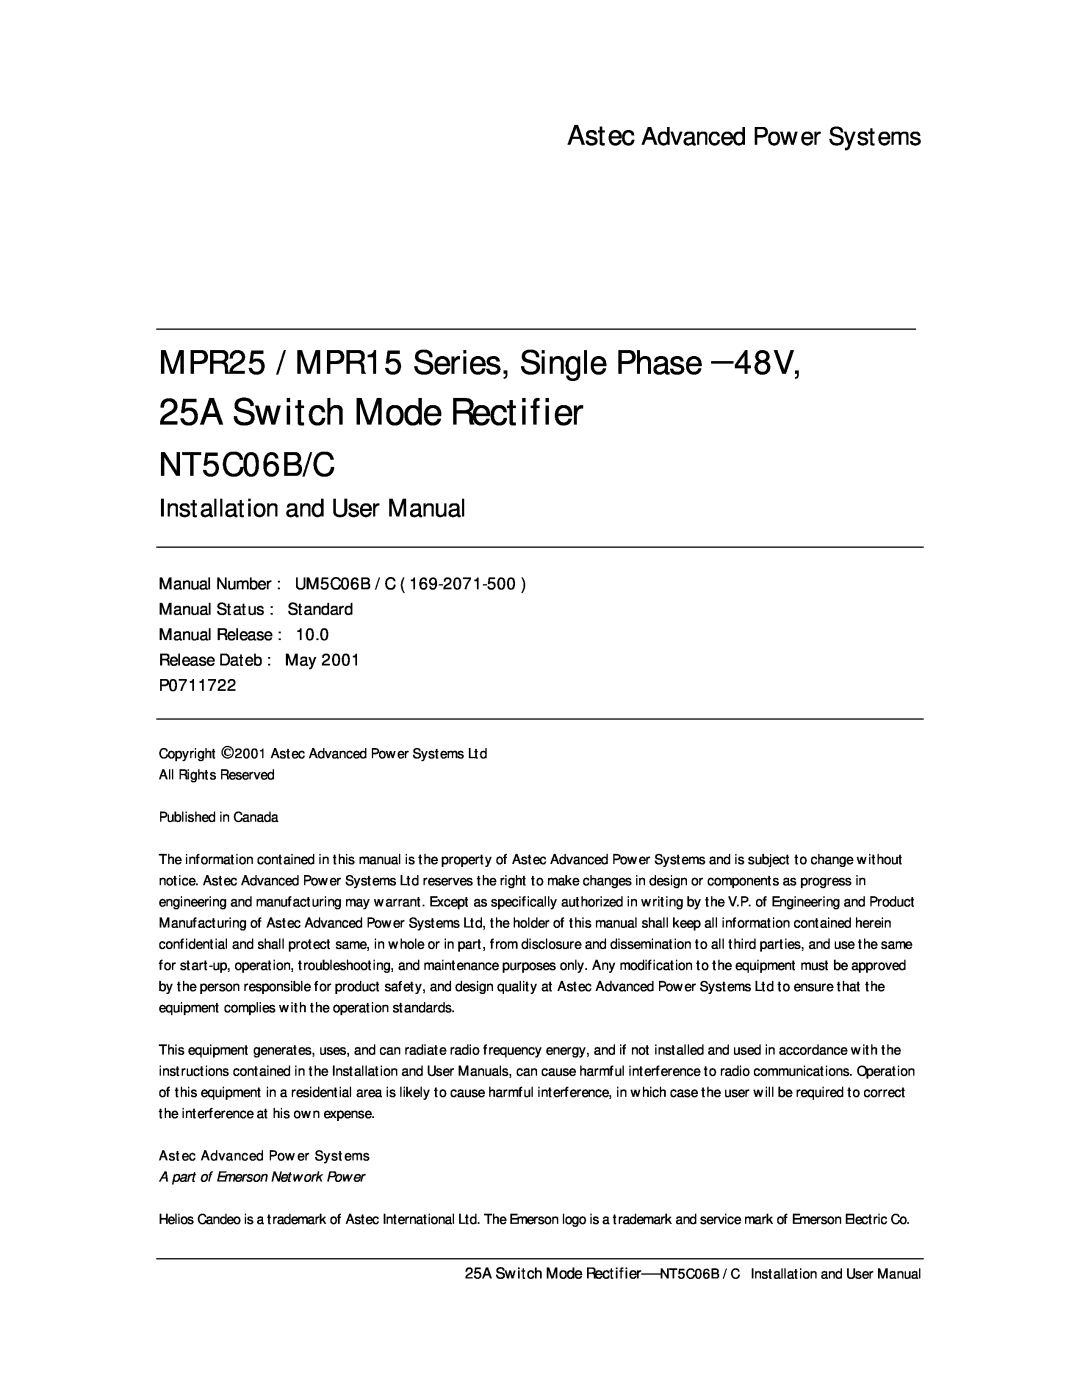 Emerson MPR25 / MPR15 Series, Single Phase, 25A Switch Mode Rectifier, NT5C06B/C, Astec Advanced Power Systems 